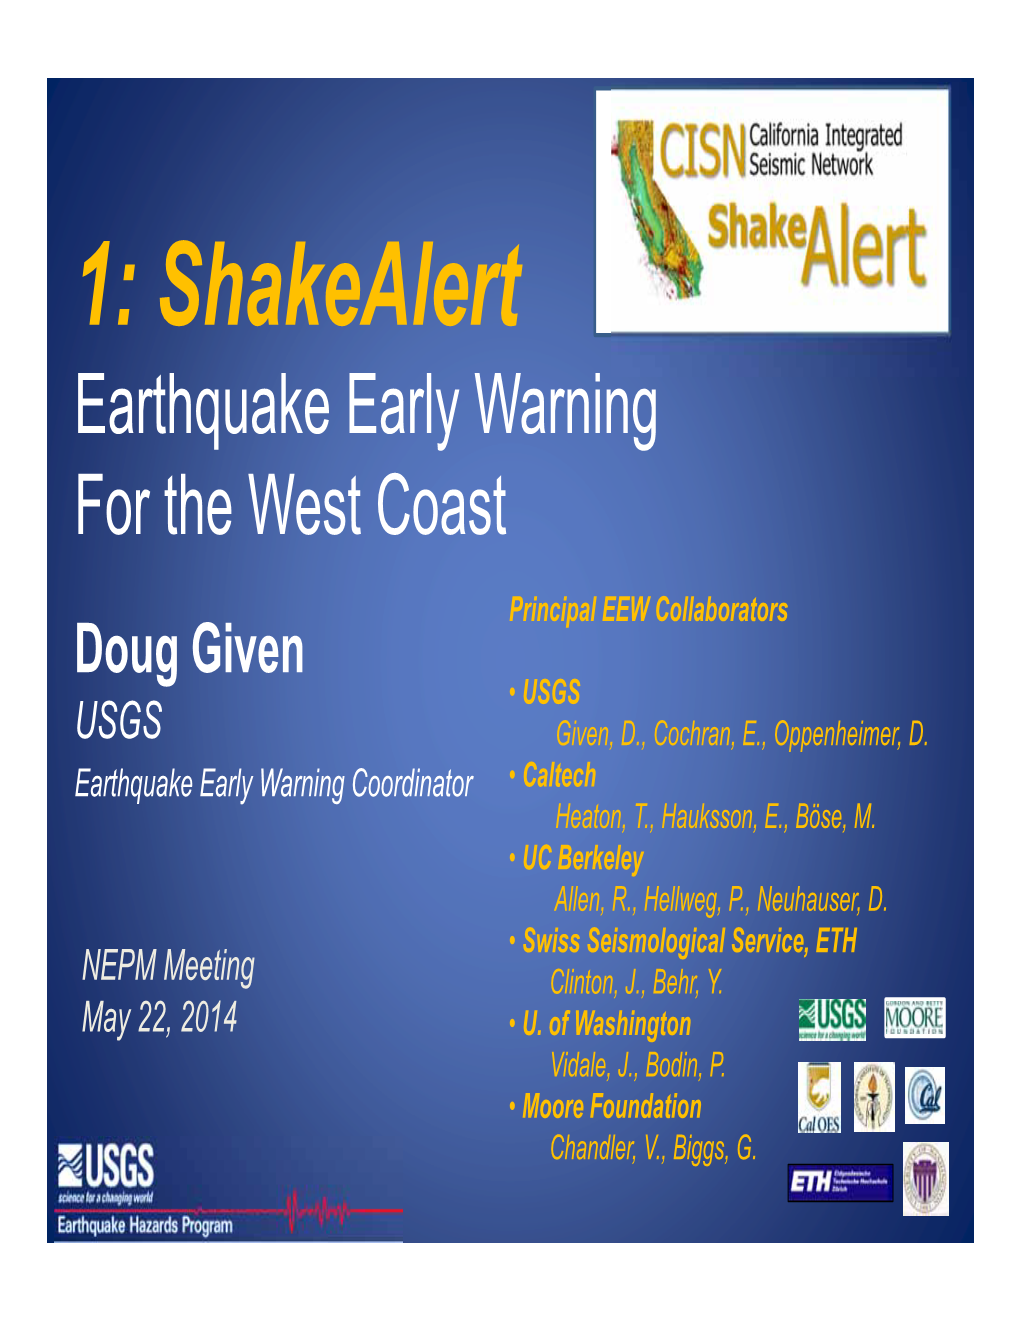 1: Shakealert Earthquake Early Warning for the West Coast